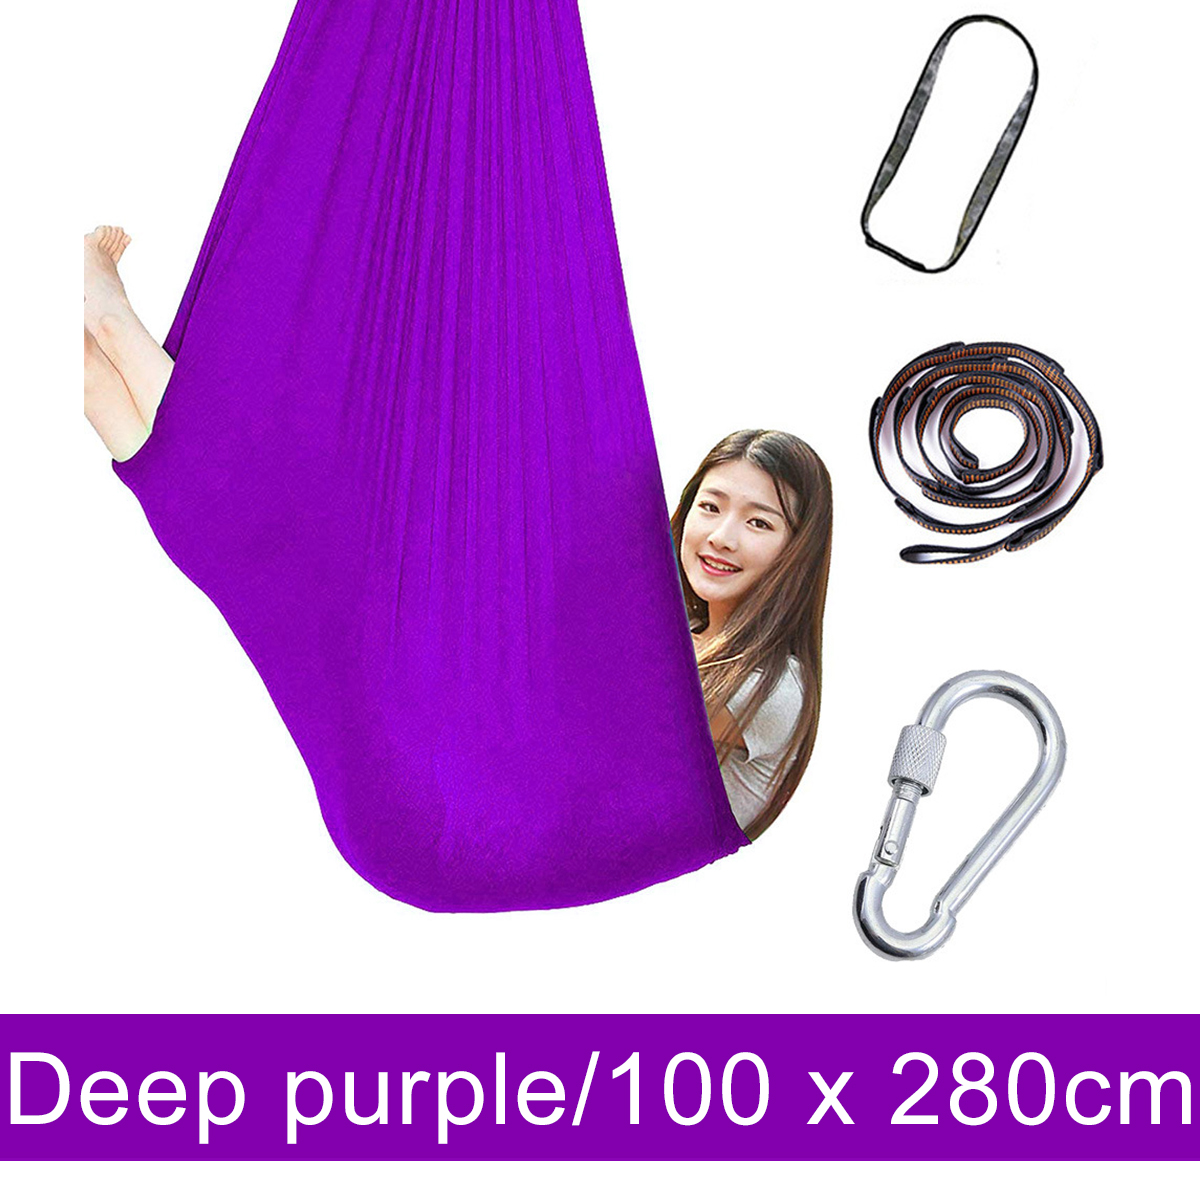 100cm x 280cm Kids Therapy Swing Cuddle Hanging Hammock with Autism ADHD Aspergers Sensory 18